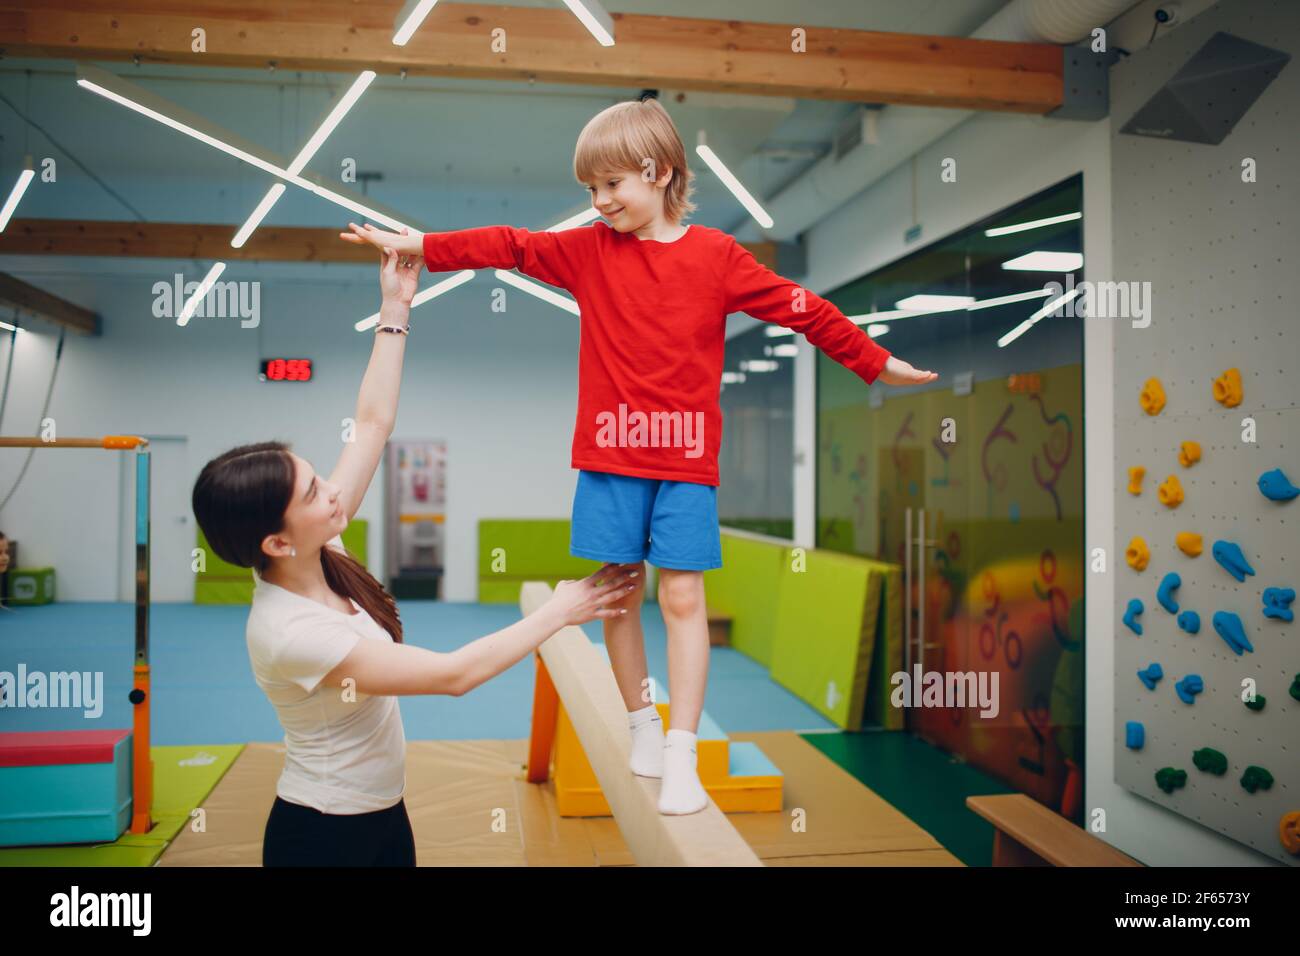 Kids doing balance beam gymnastics exercises in gym at kindergarten or elementary school. Children sport and fitness concept Stock Photo